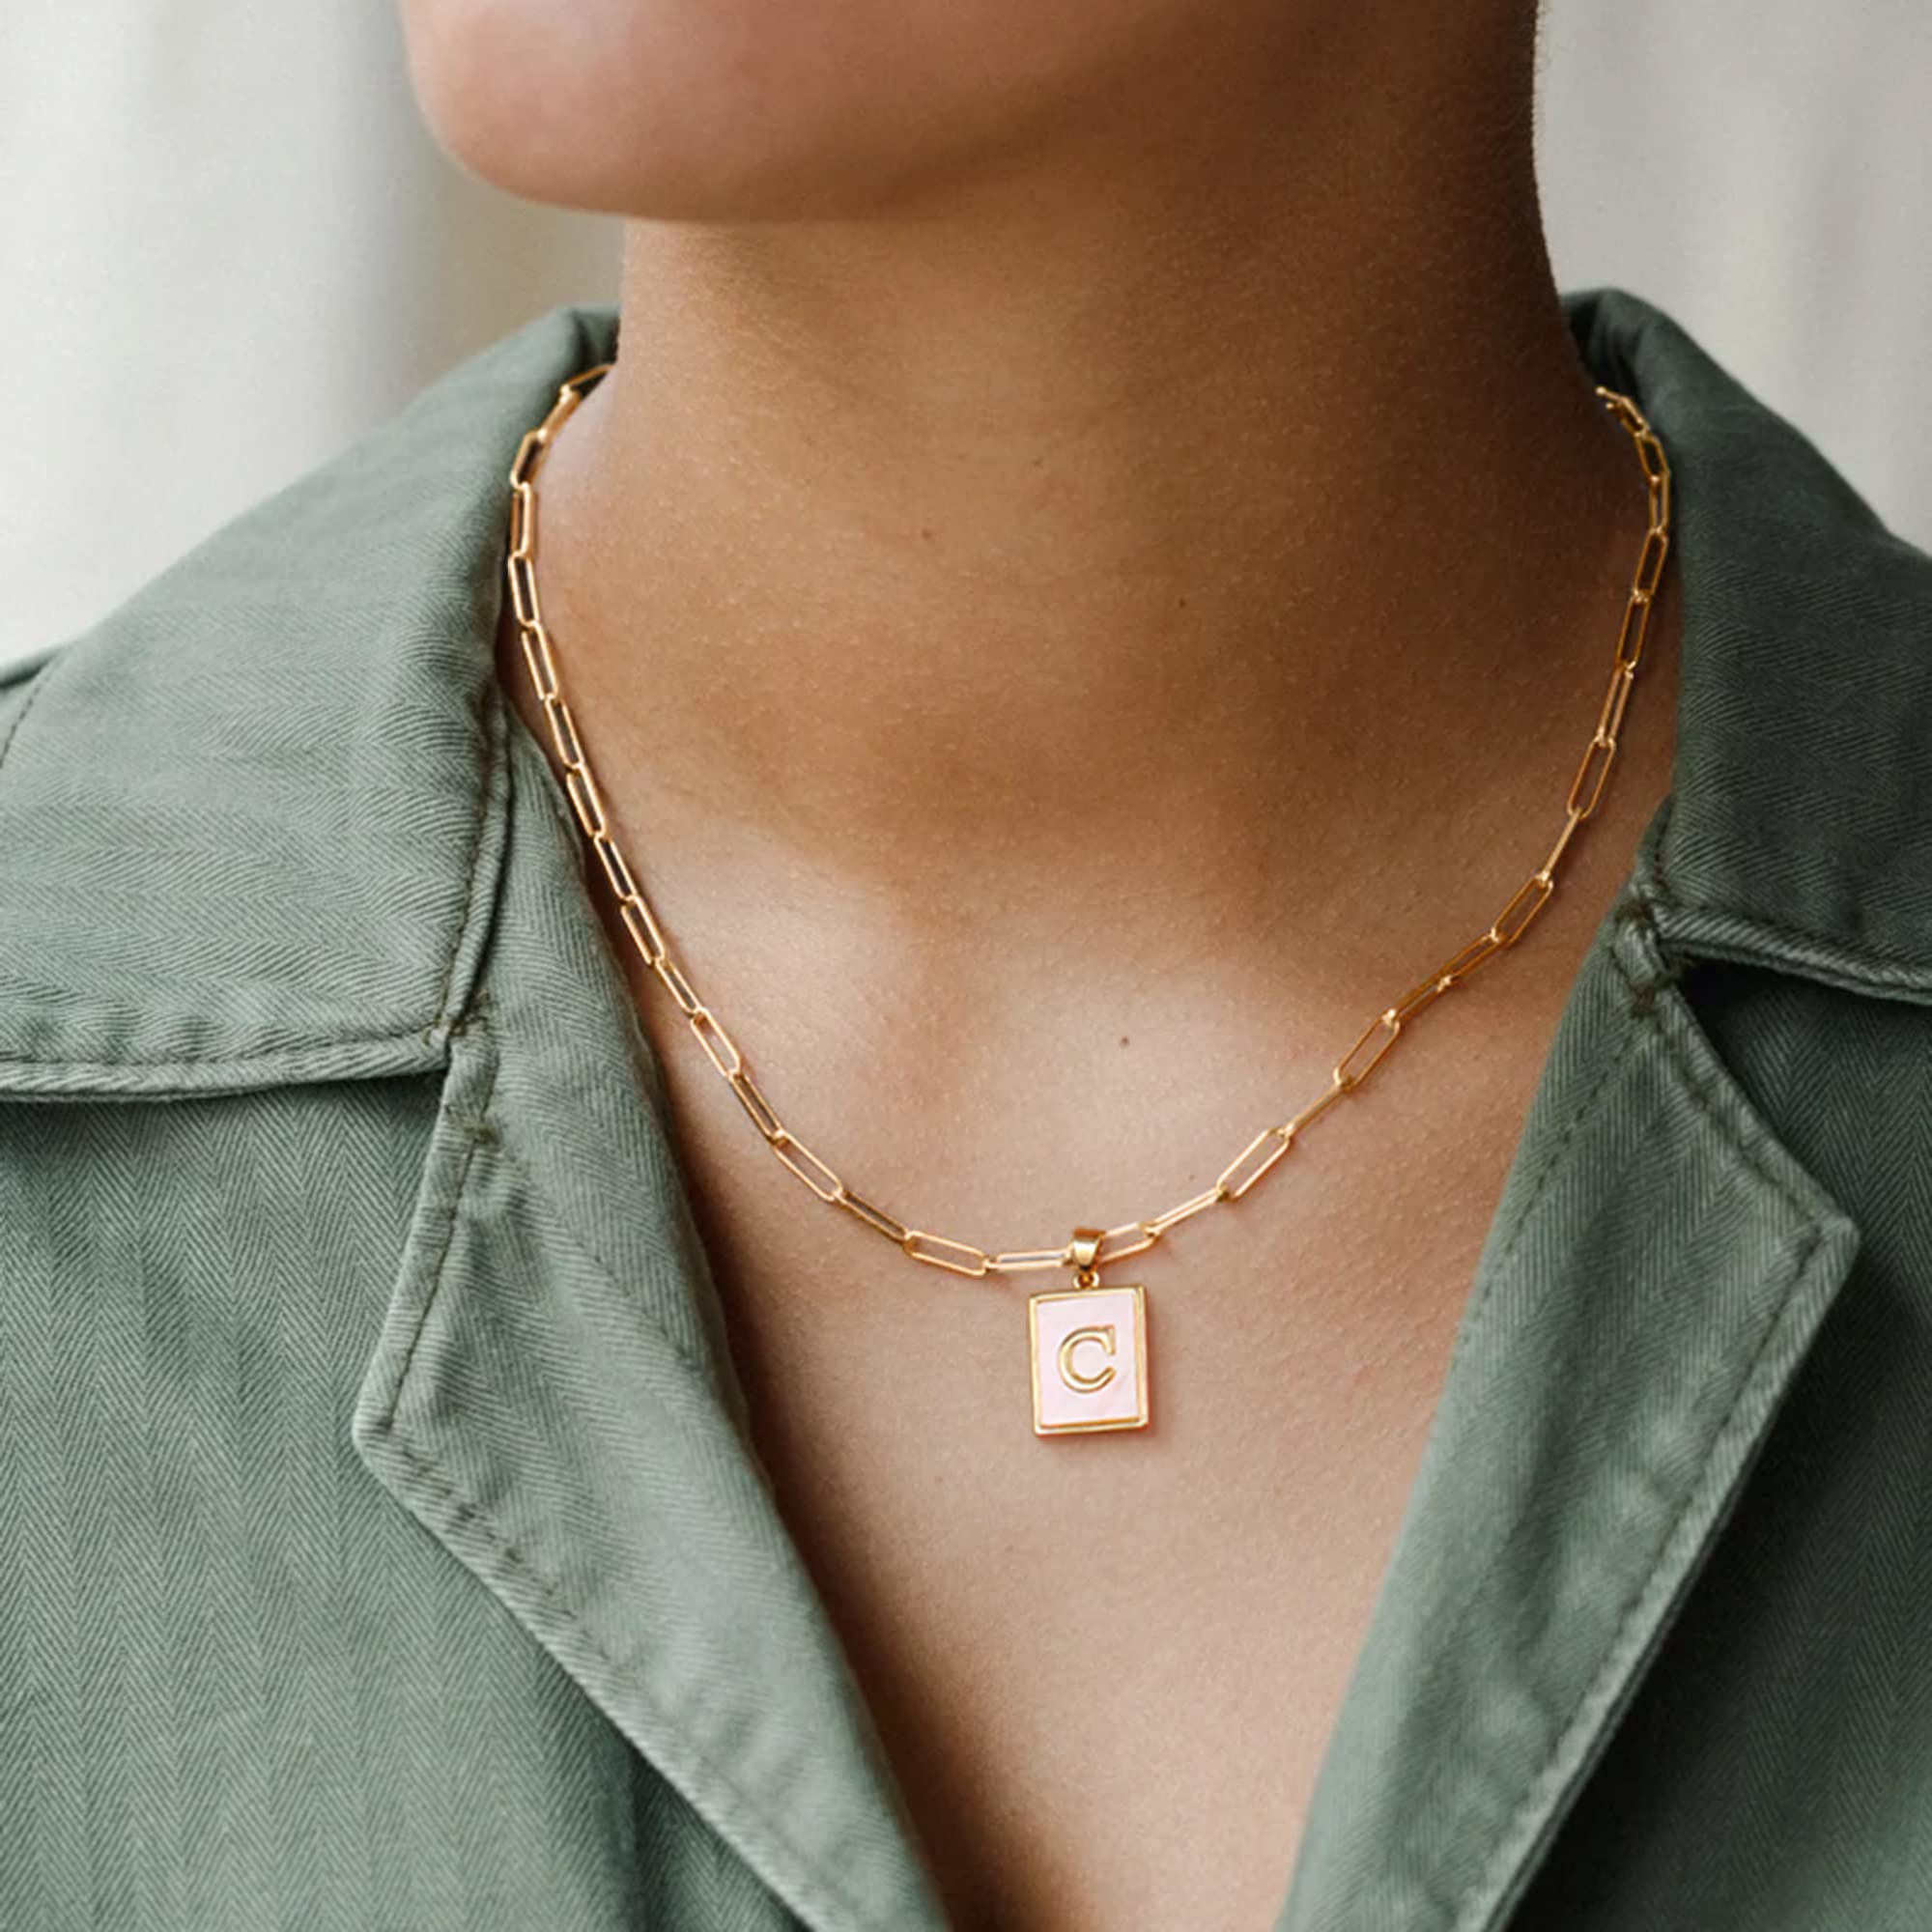 10 Best Chain Link Necklaces : Chic Gold Chains for Women | Chain necklace, Chain  necklace outfit, Necklace